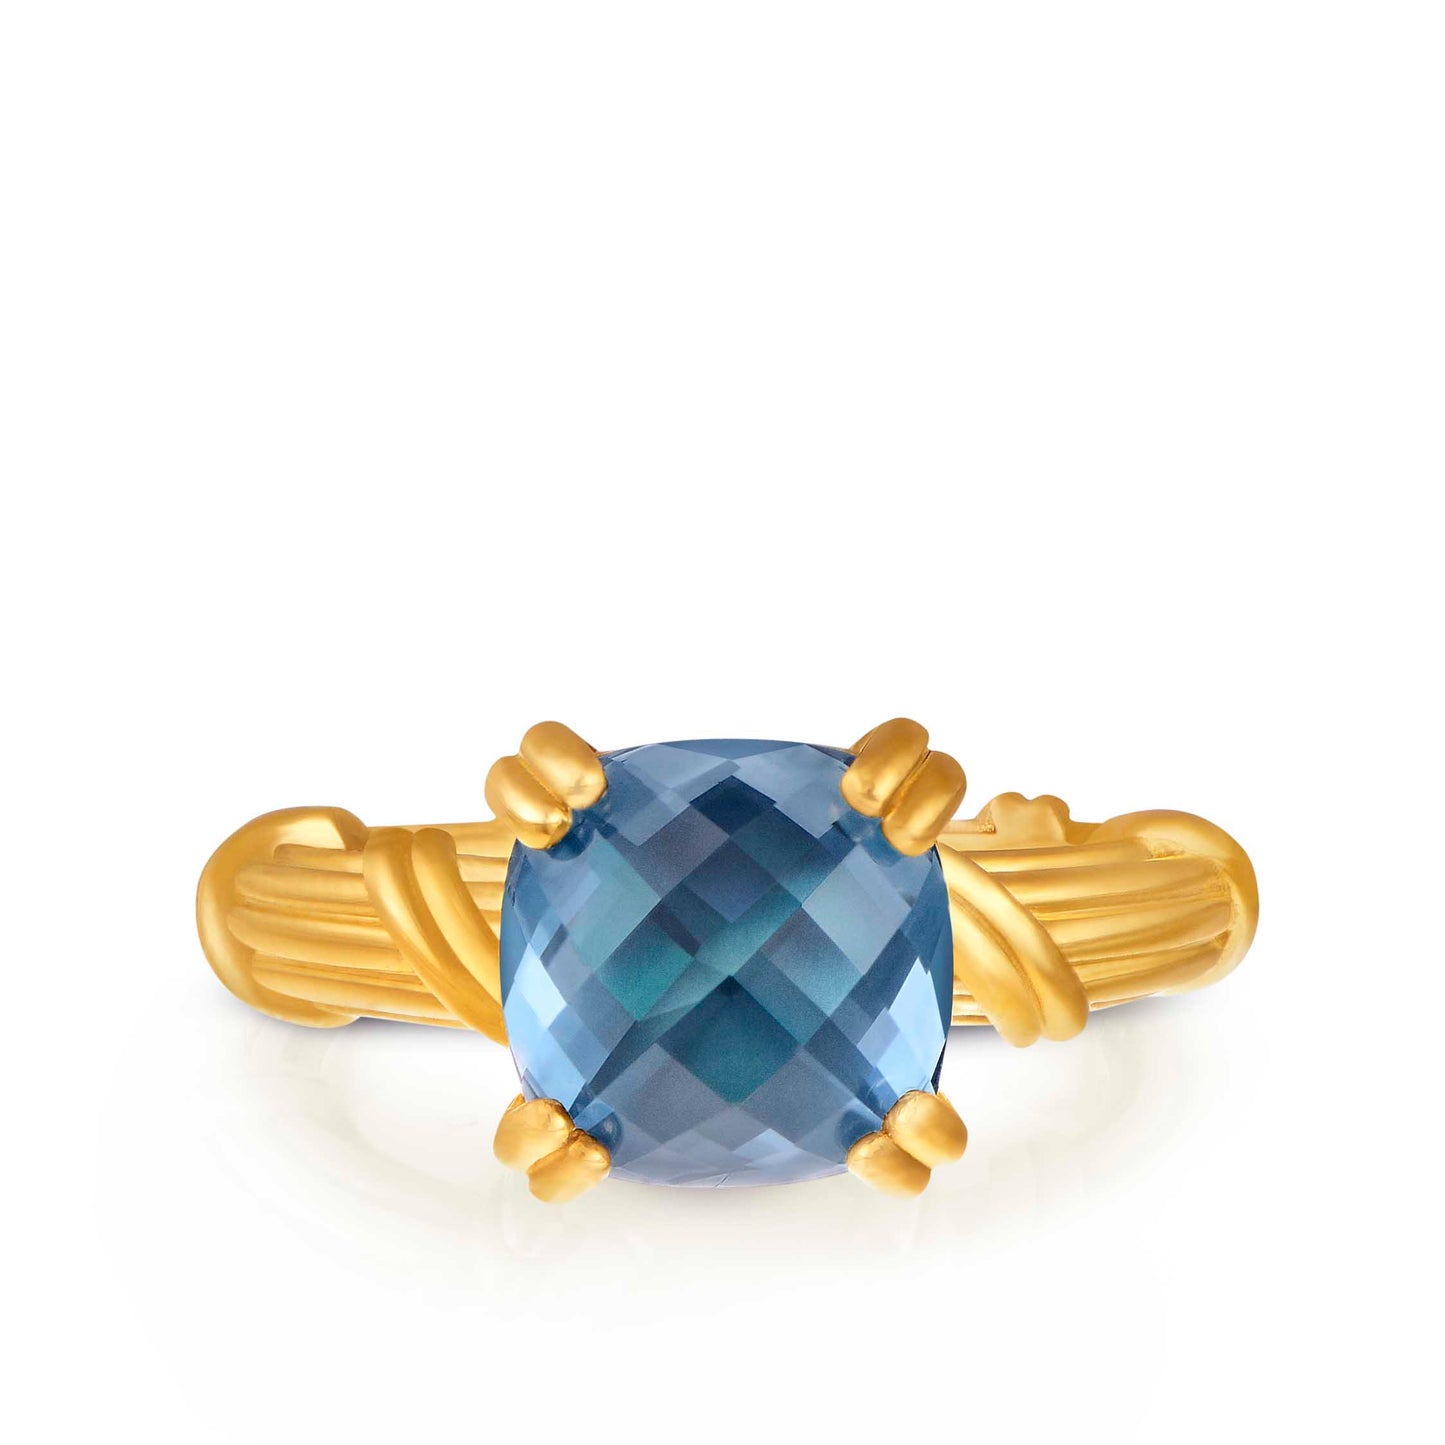 Fantasies London Blue Topaz Cocktail Ring in 18K yellow gold